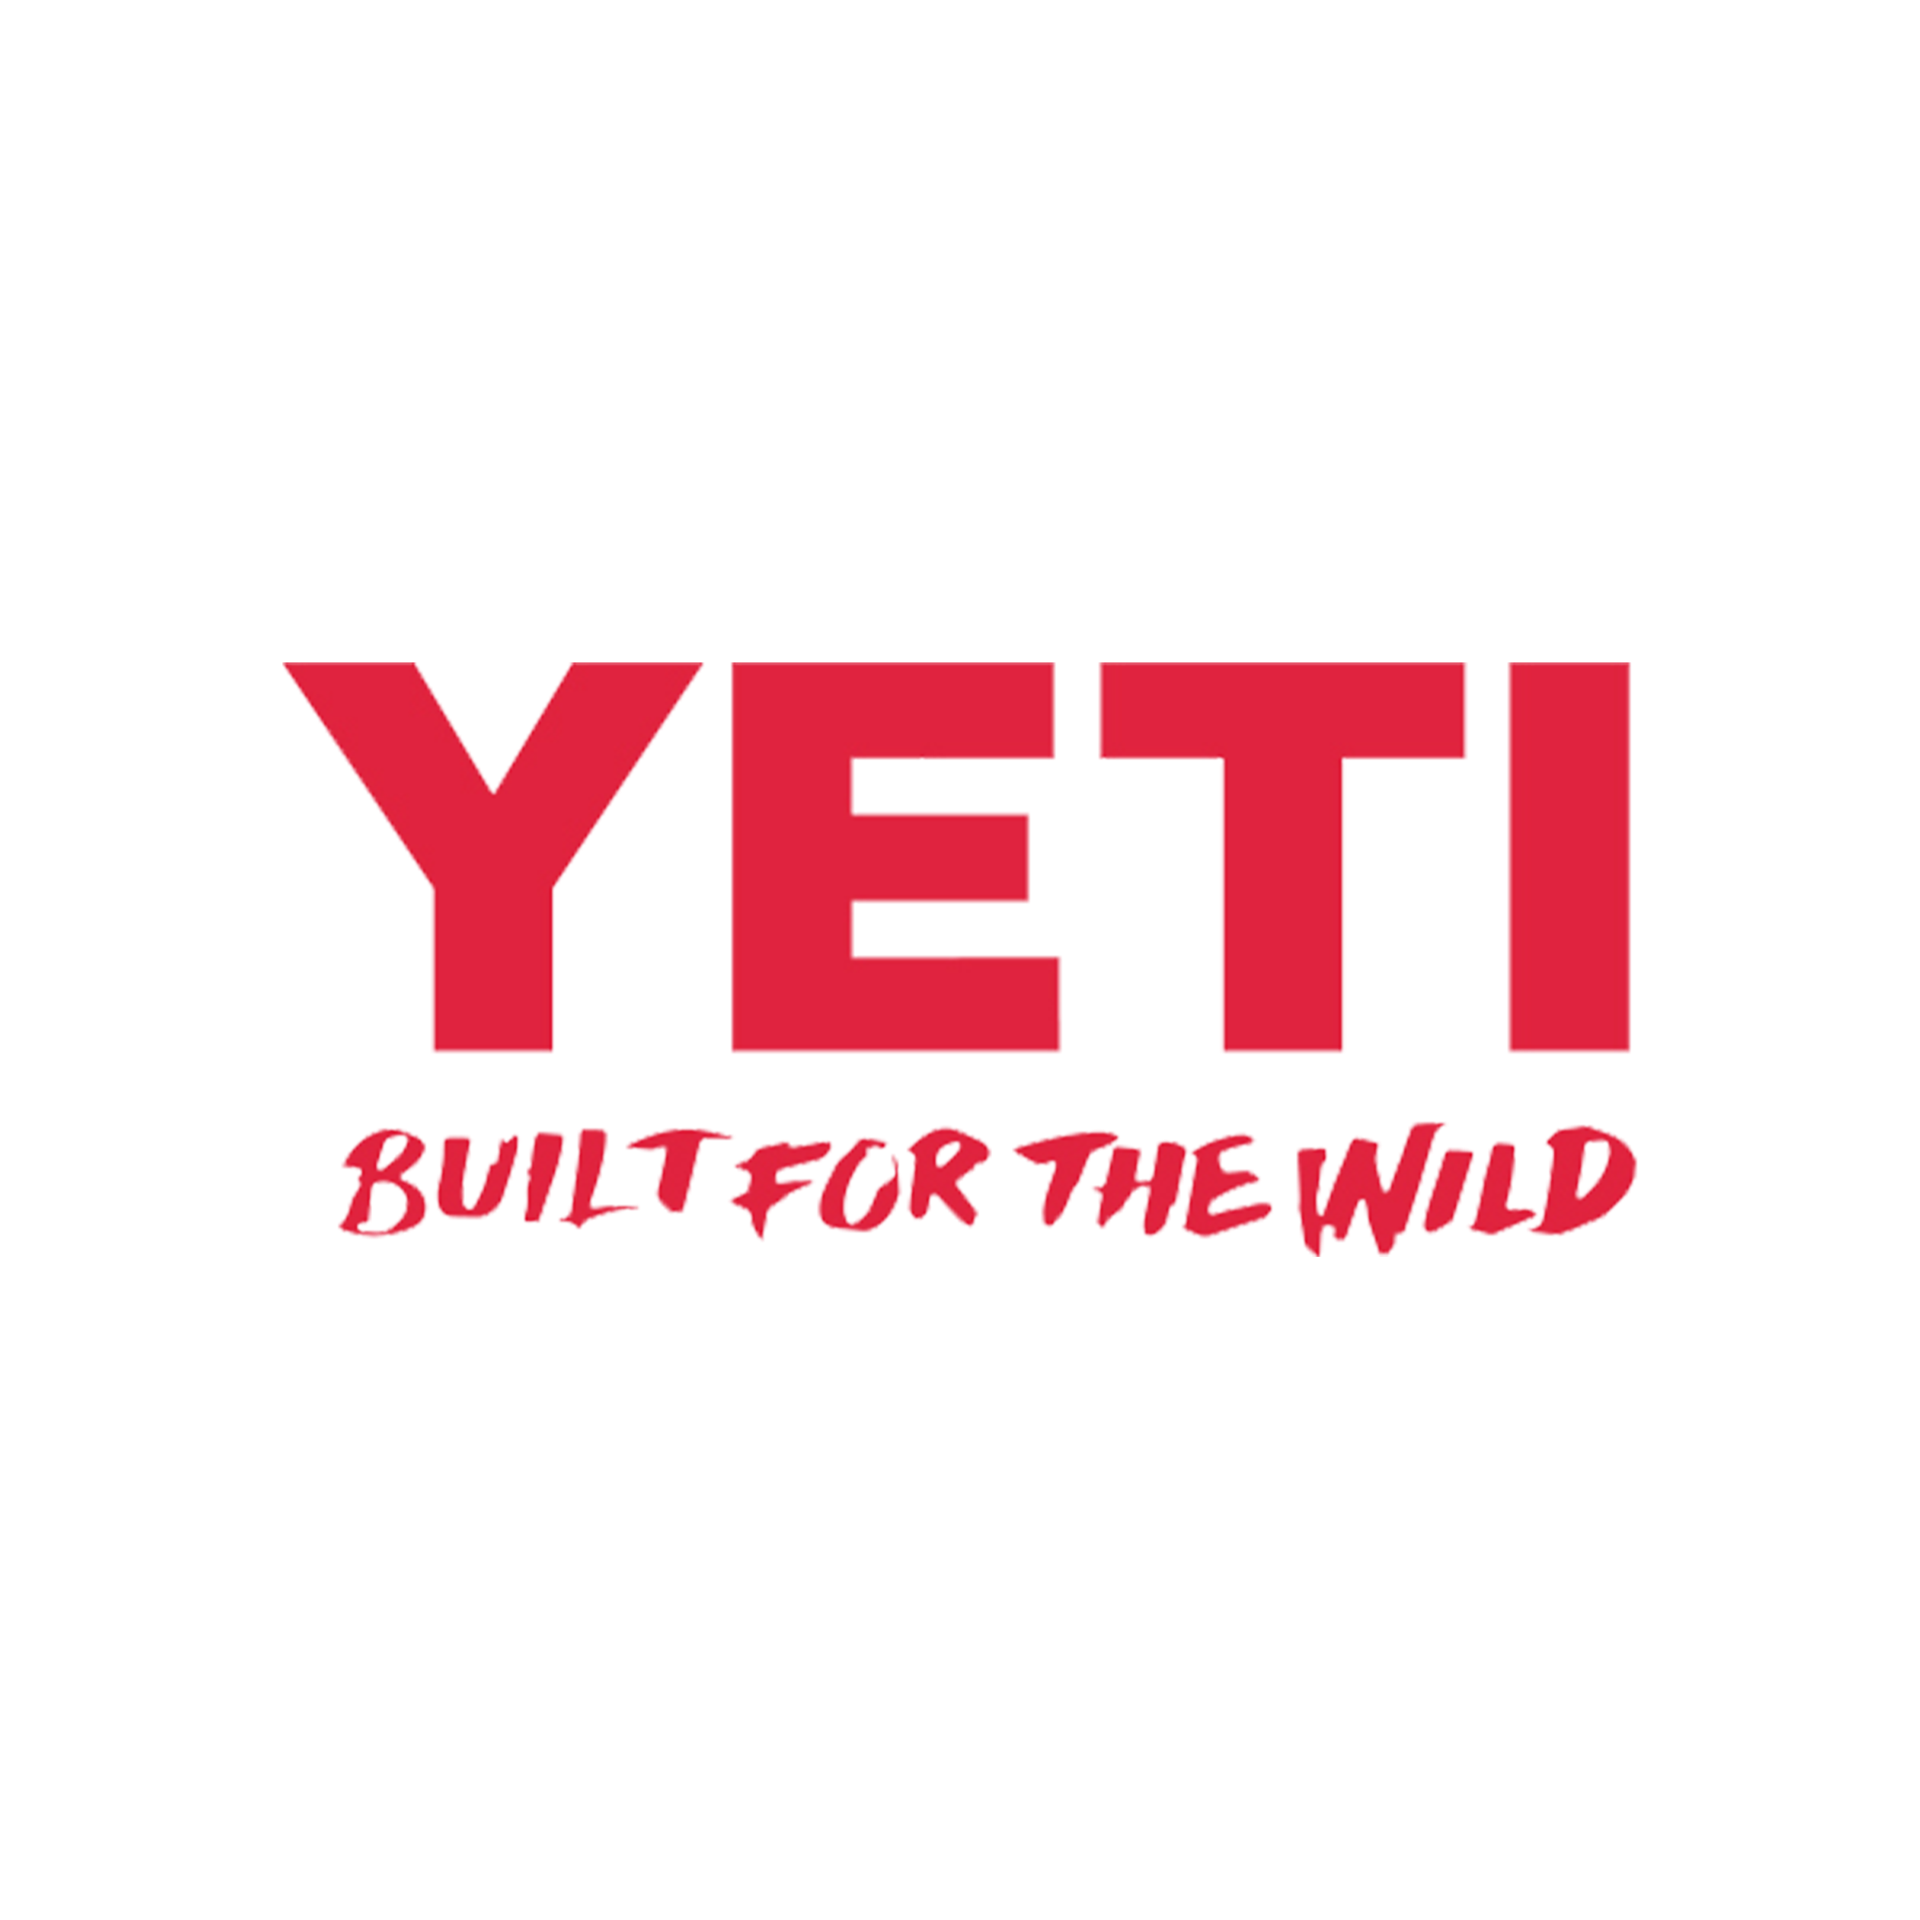 Built For The Wild Decal Red YETI